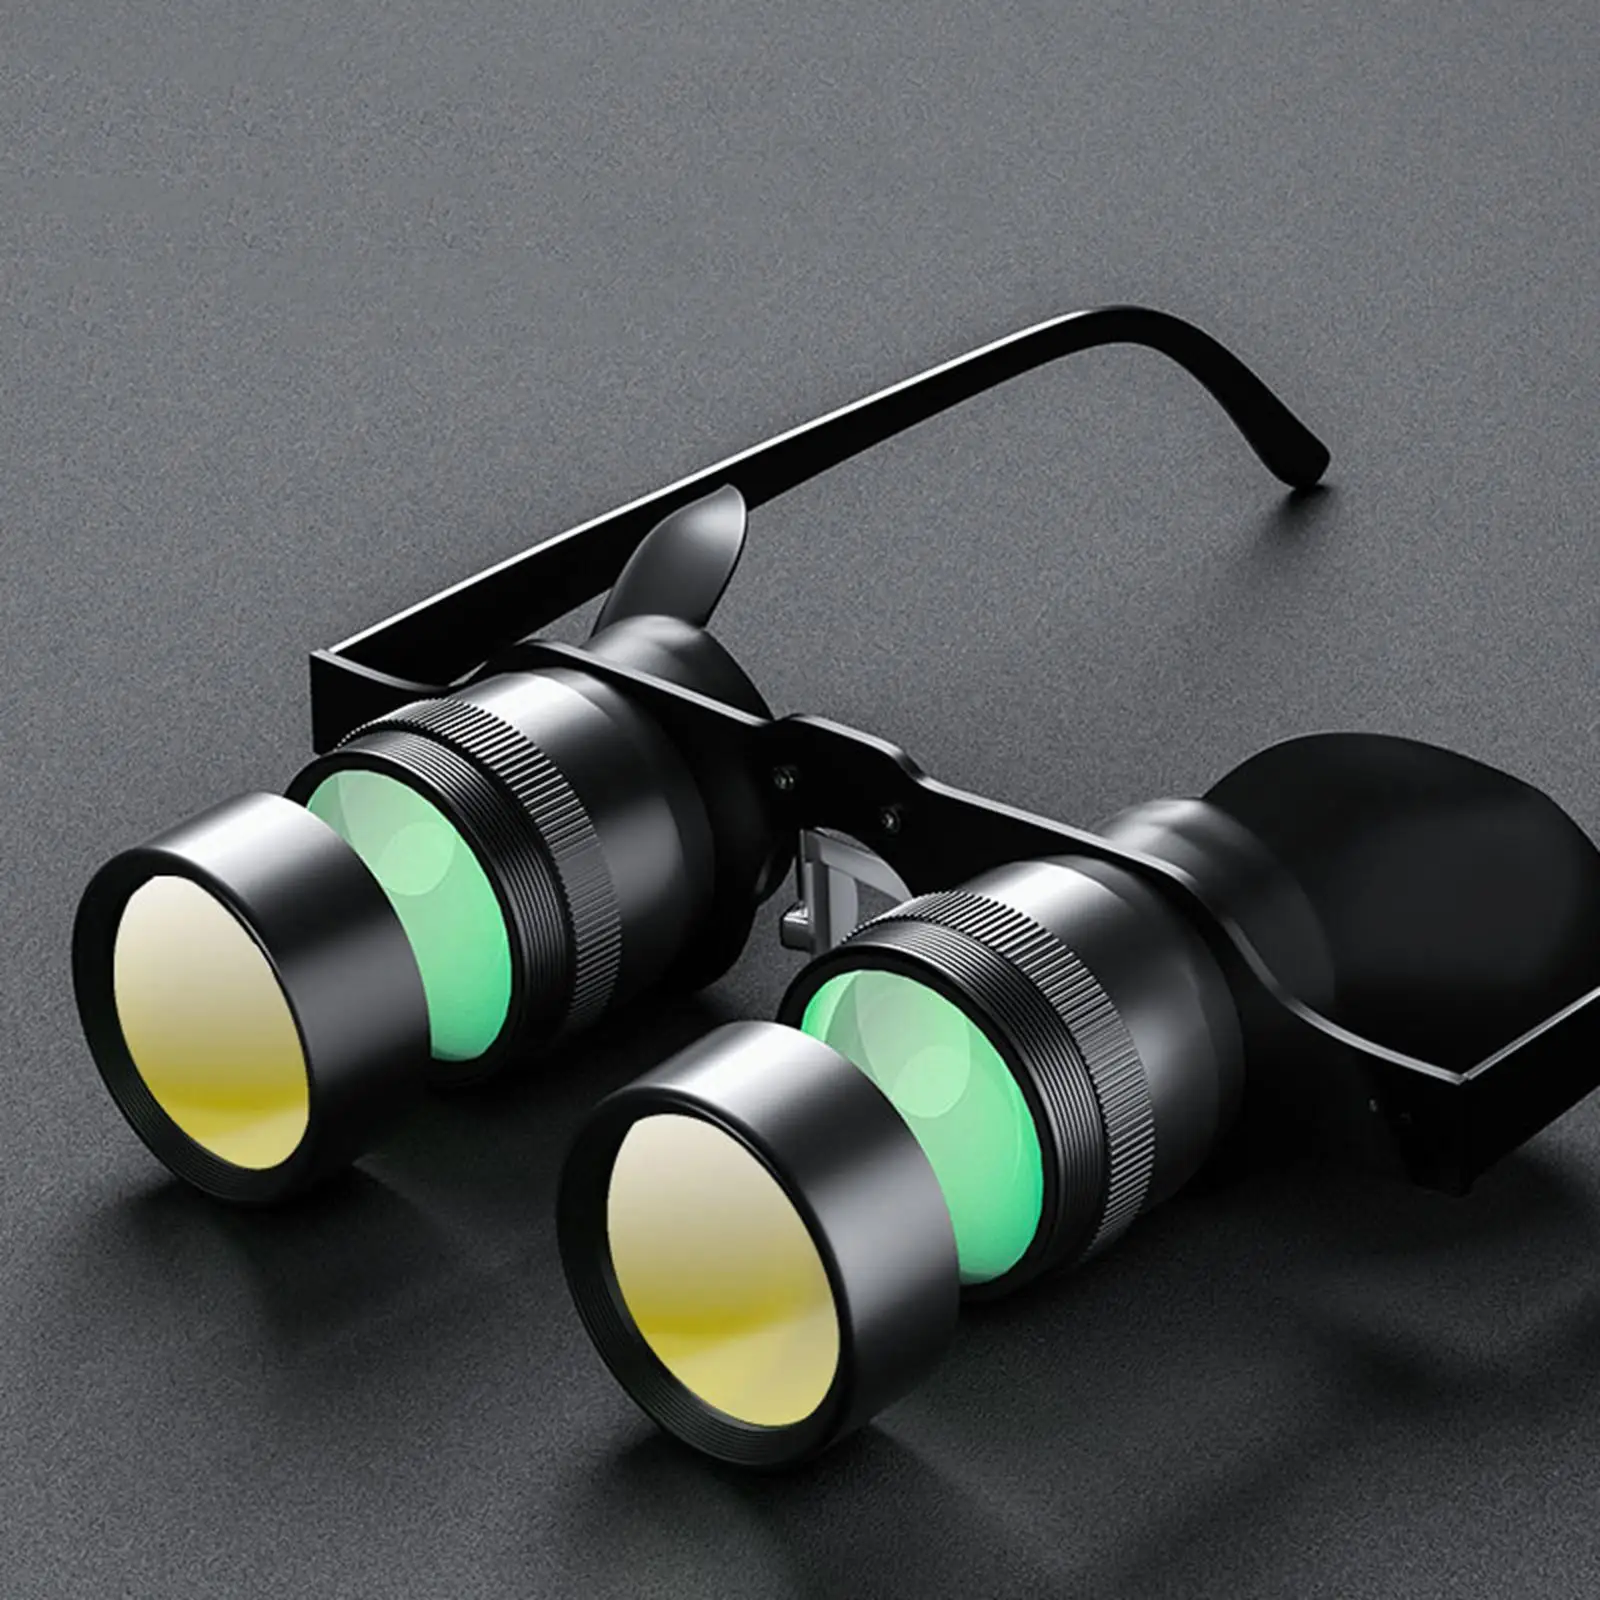 Fishing Telescope Glasses  HD   Telescope for Concert Watching Theater